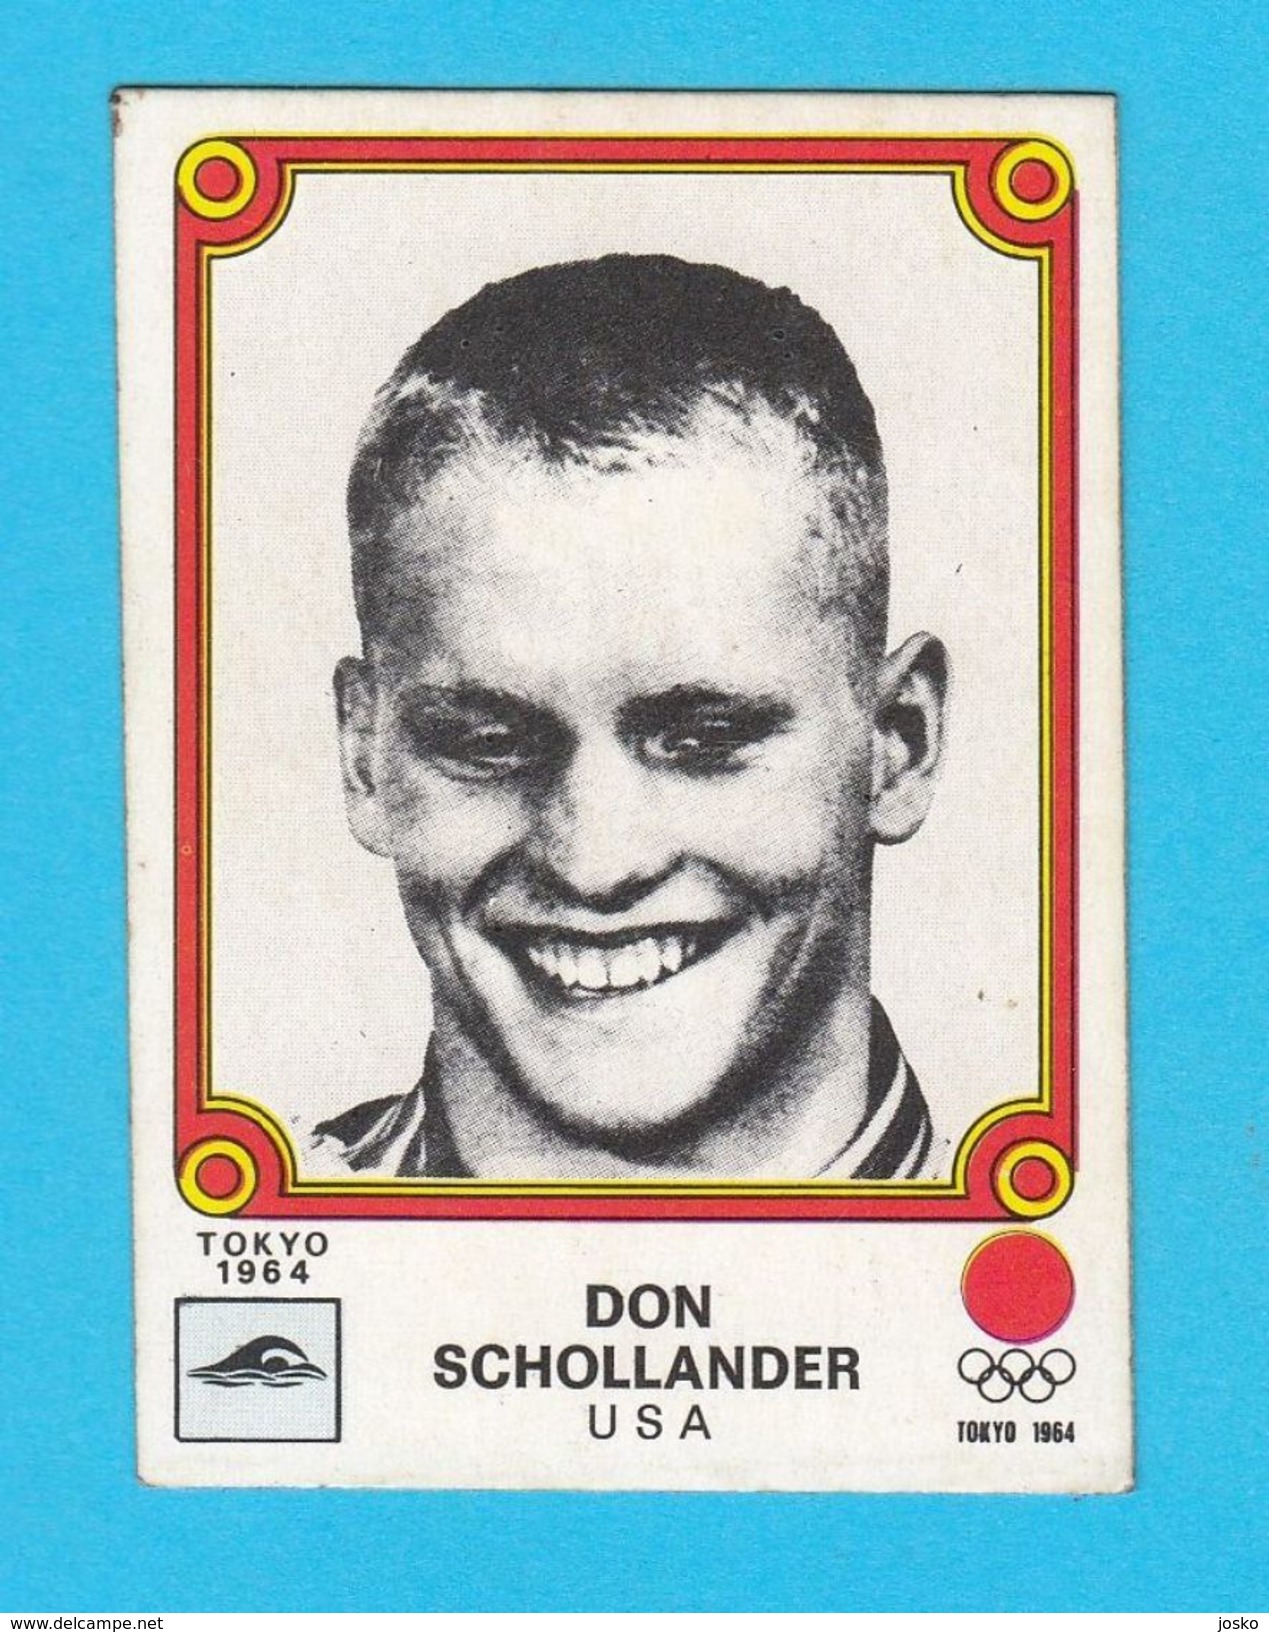 PANINI ROOKIE CARD - OLYMPIC GAMES MONTREAL '76. No. 83. DON SCHOLLANDER - USA Swimming Juex Olympiques 1976 Olympia - Trading-Karten